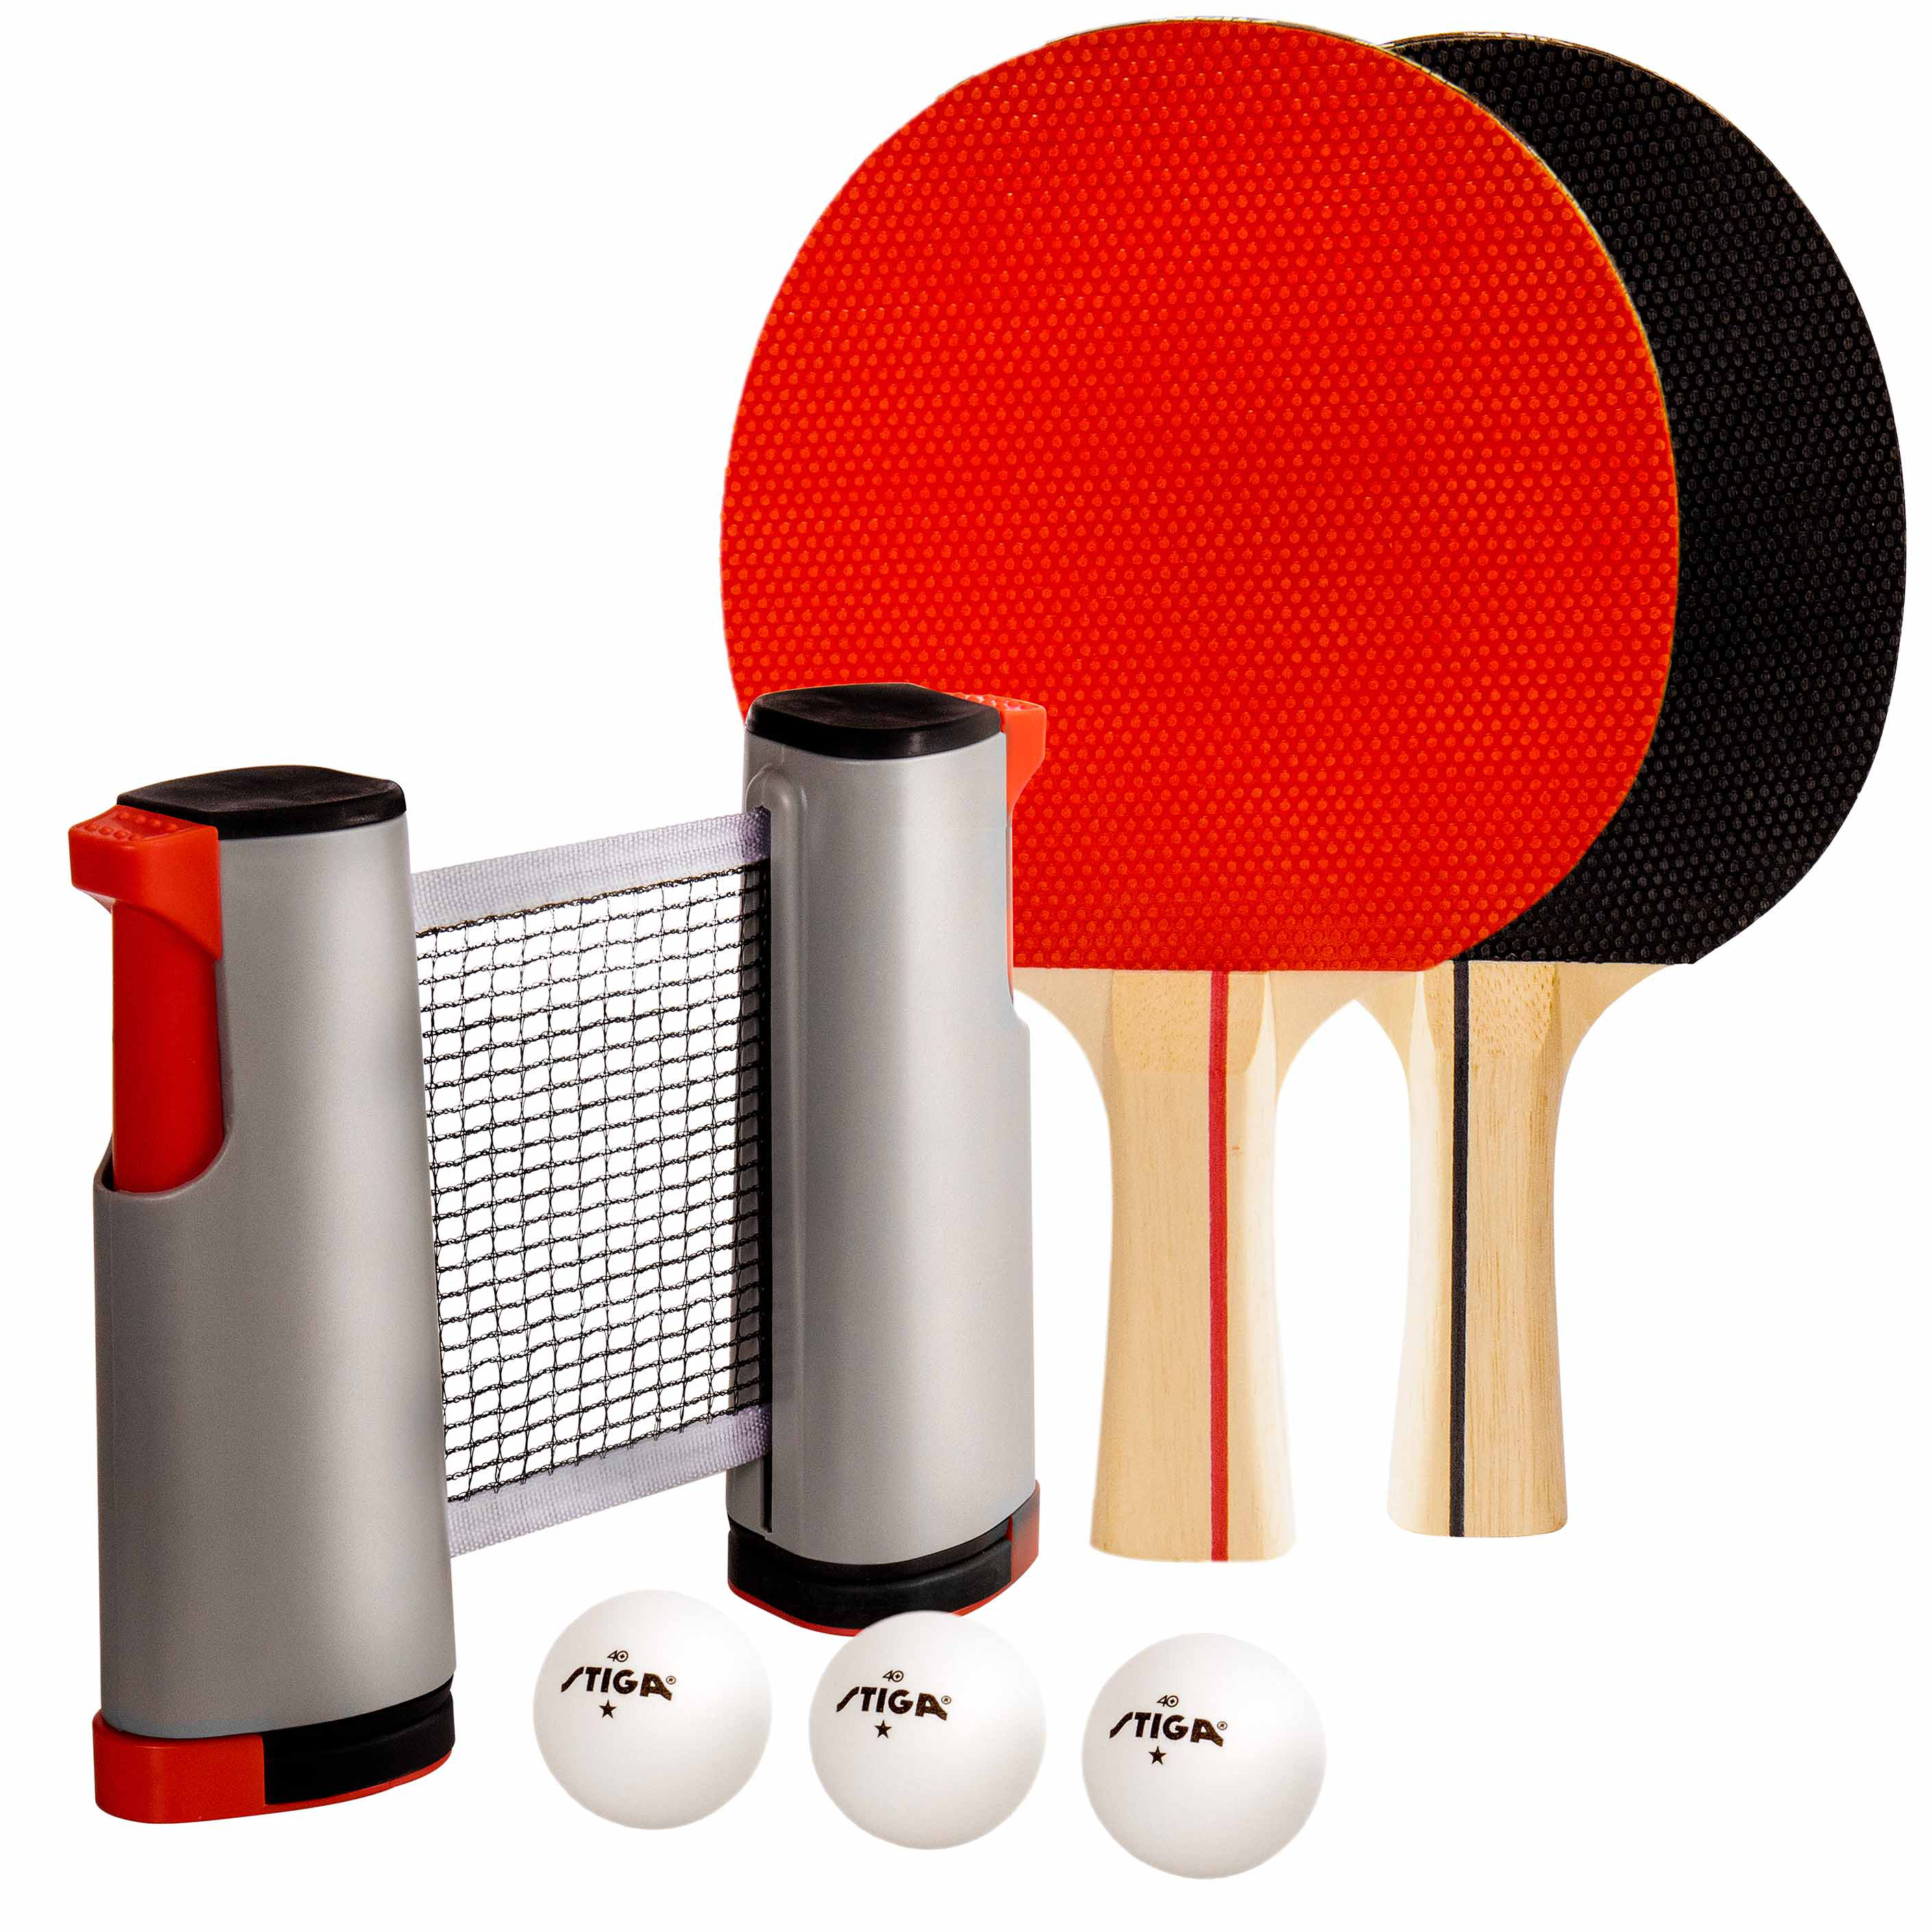 GSE Games & Sports Expert Retractable Ping Pong Net Set with